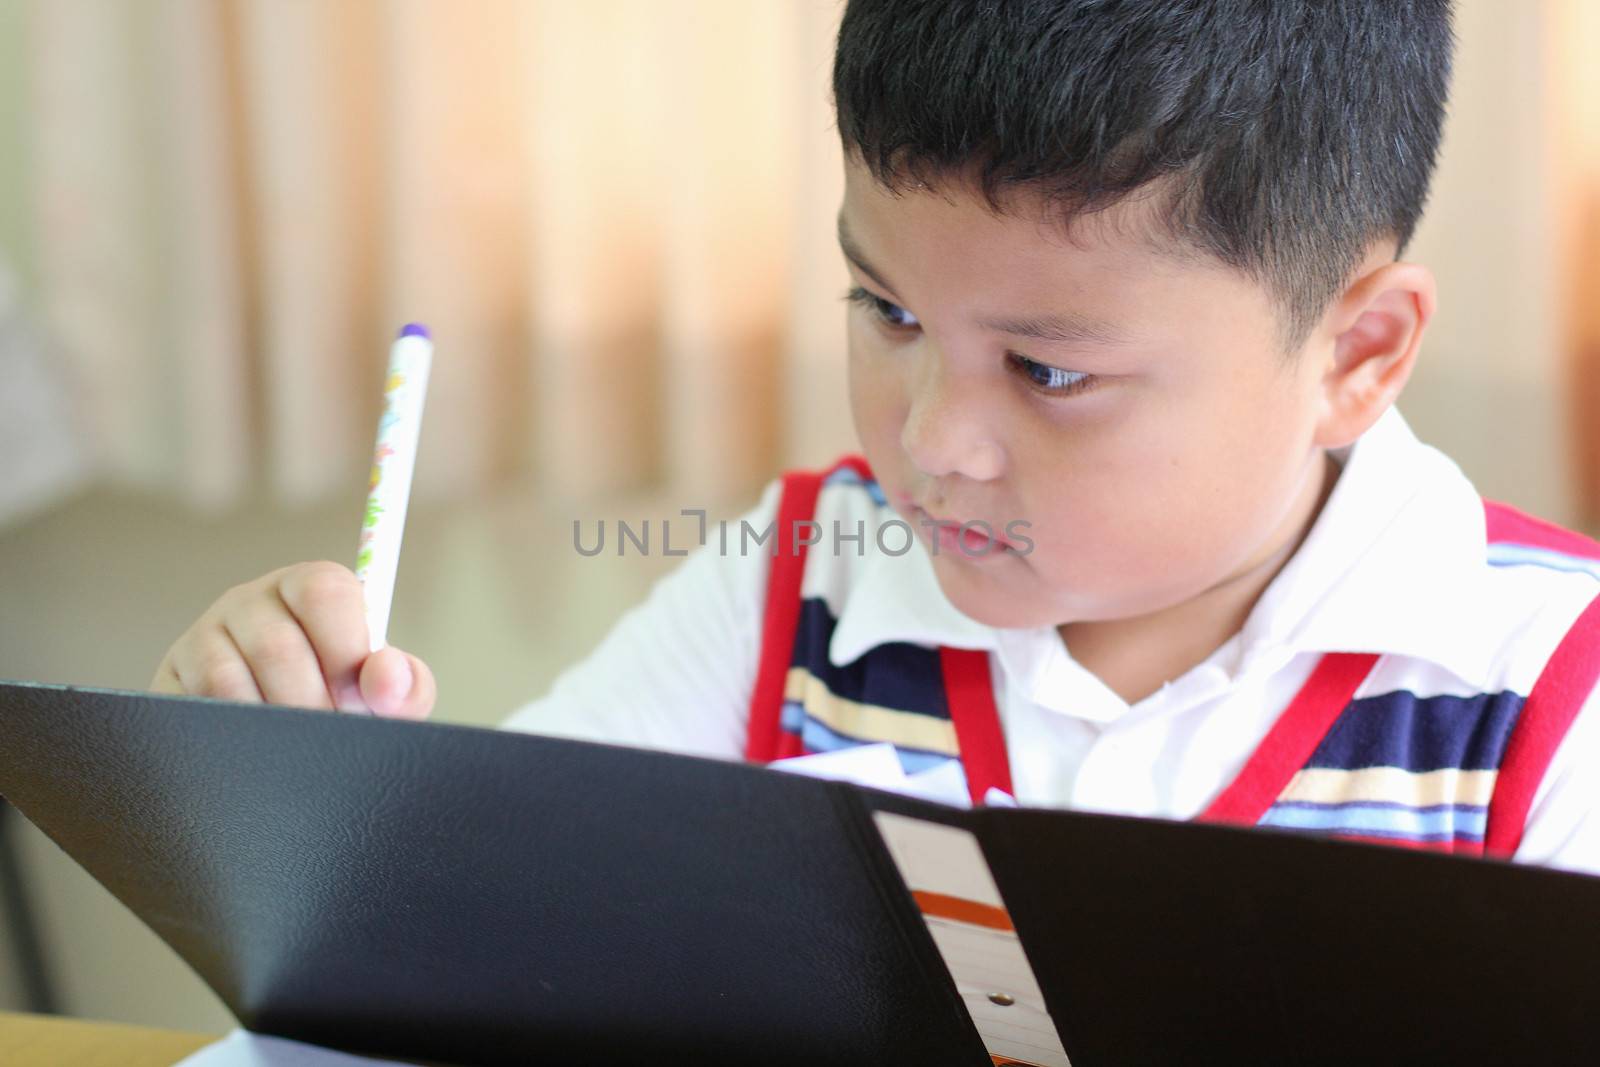 The boy intently to checking documents  by myrainjom01